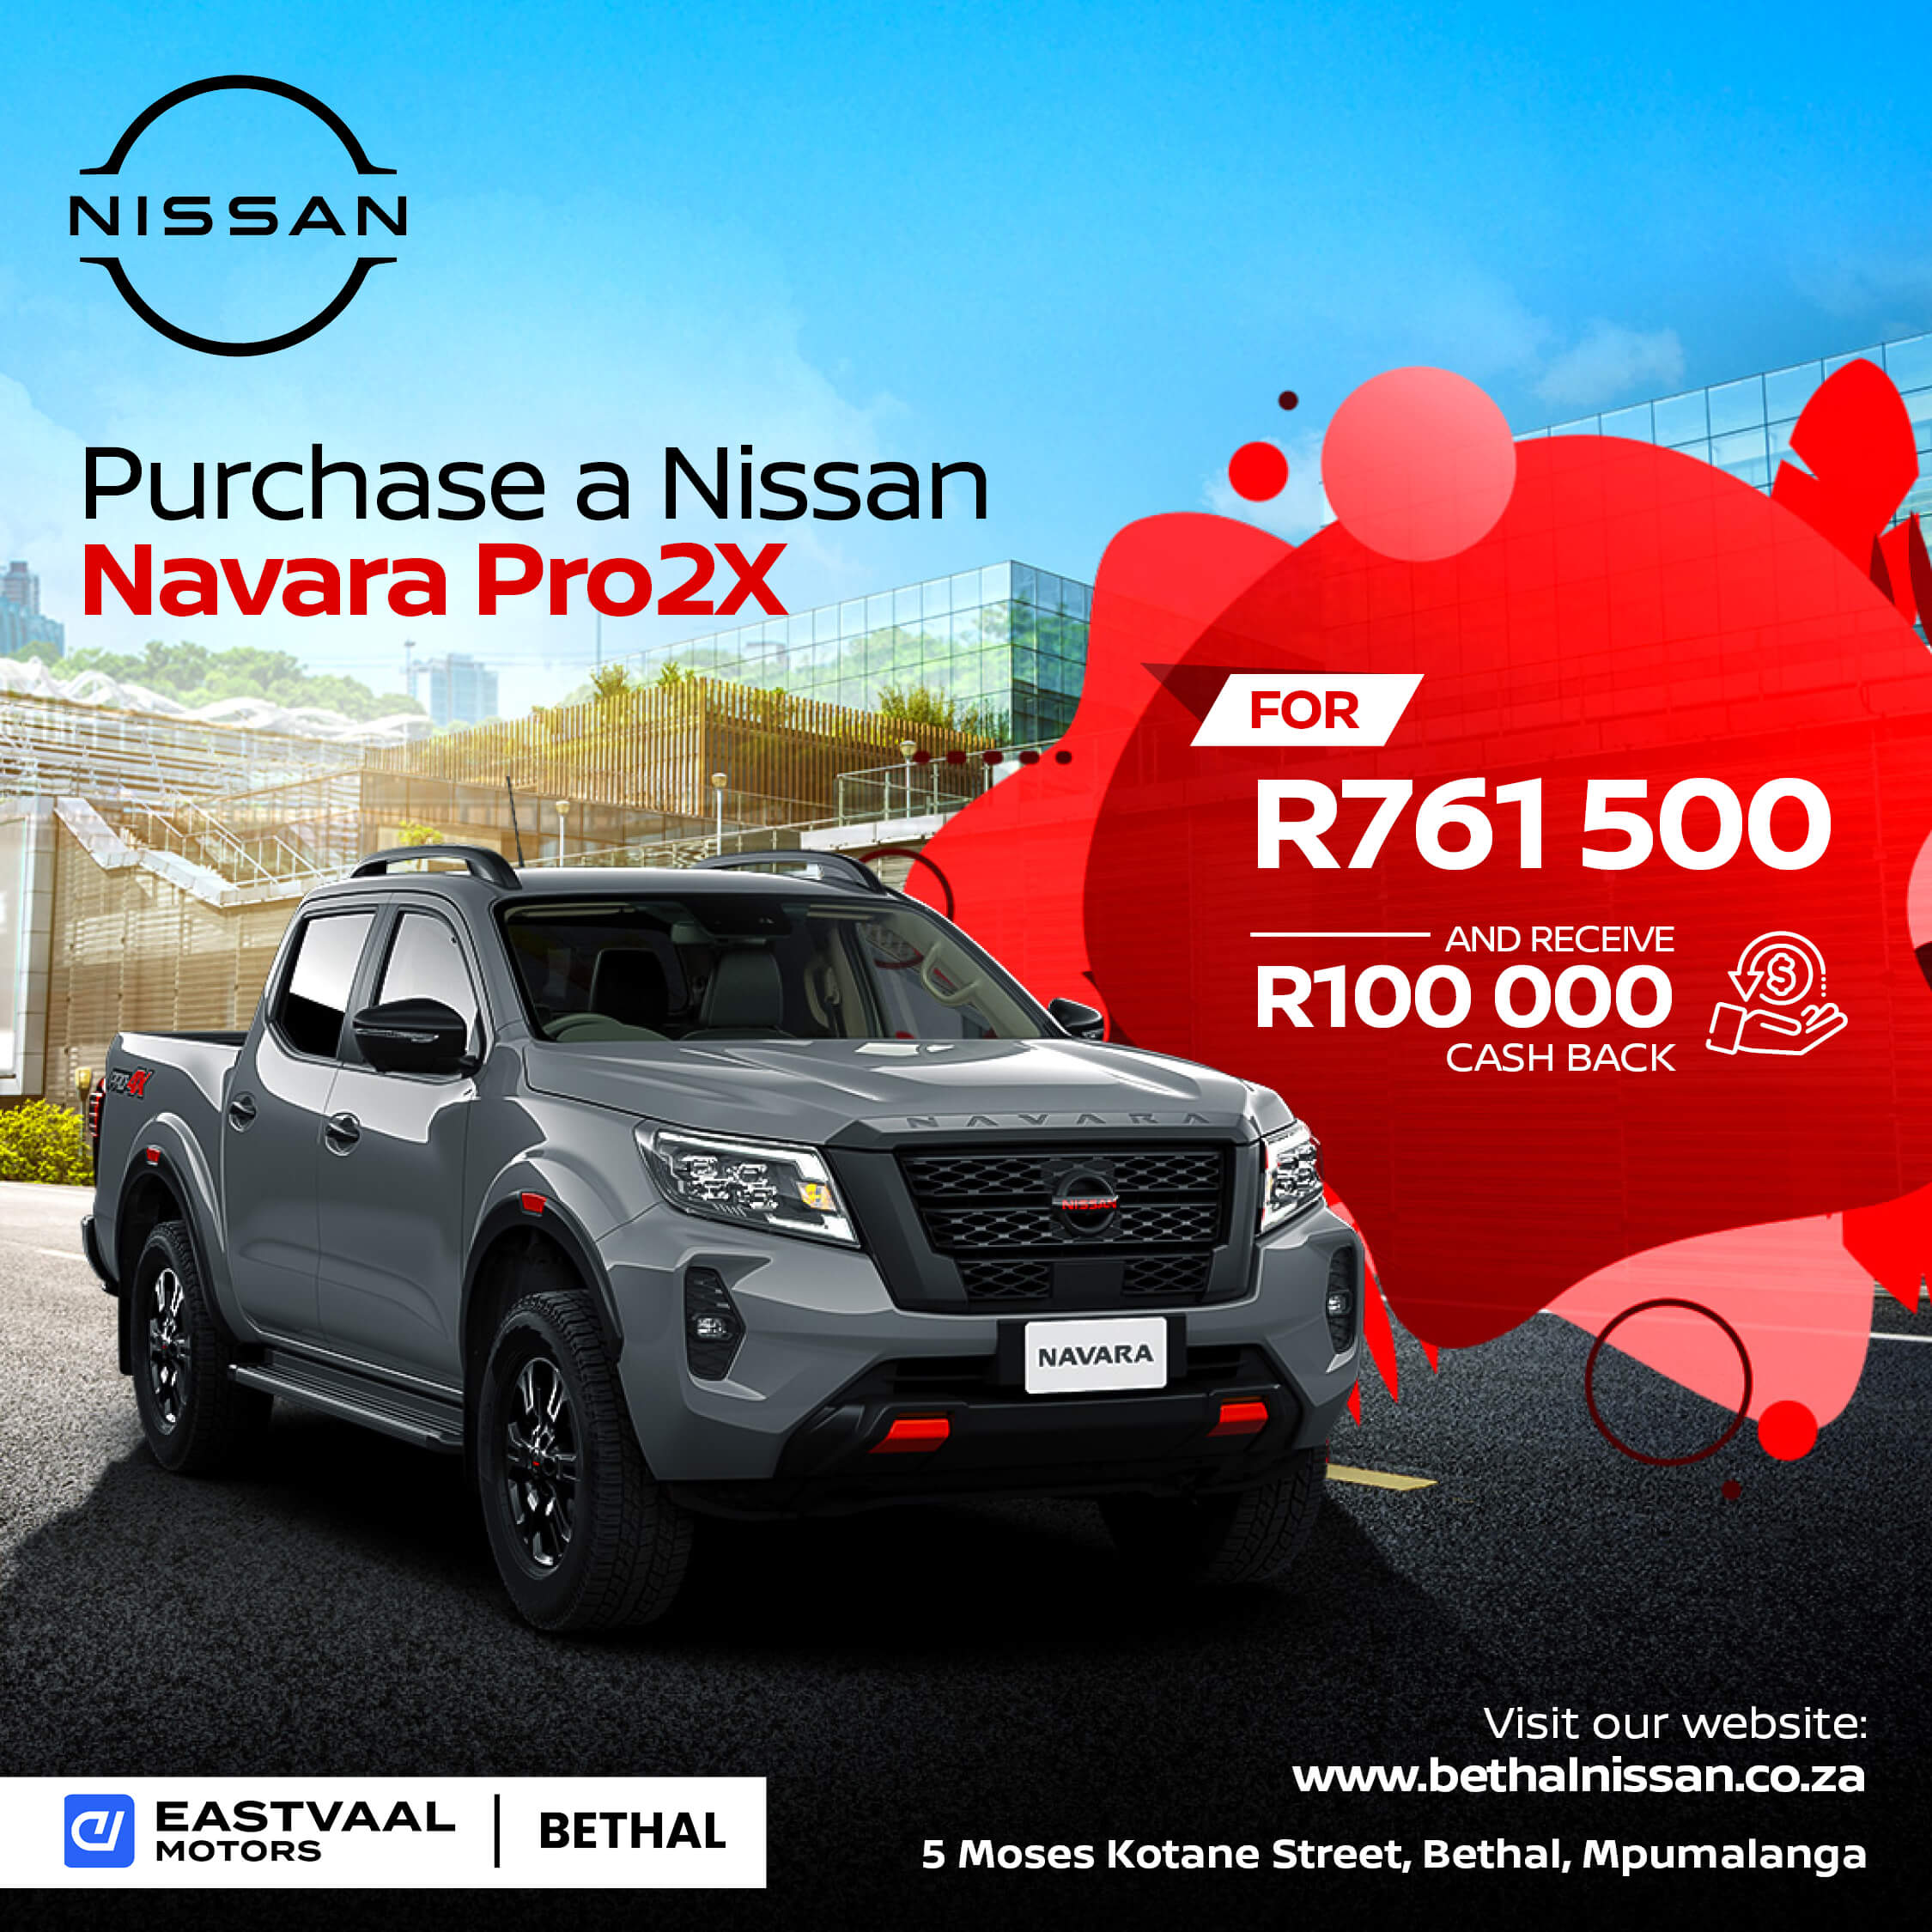 Purchase a Nissan Navara Pro2X image from 